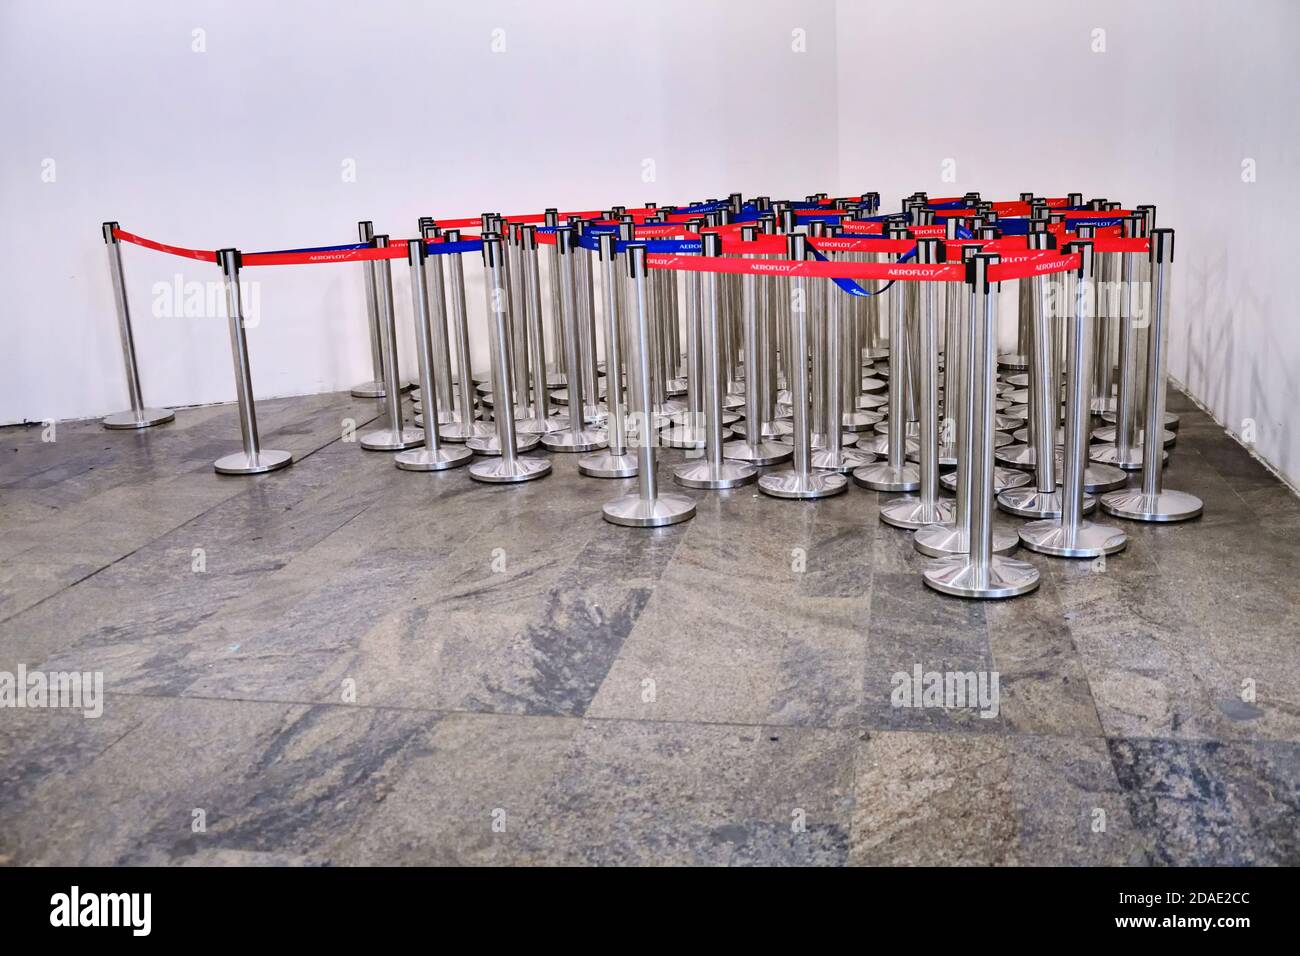 Tape Aeroflot barrier at the airport. Red and blue tape fence barricade entry to stop line of service airport terminal - Sheremetievo, Moscow / Russia Stock Photo